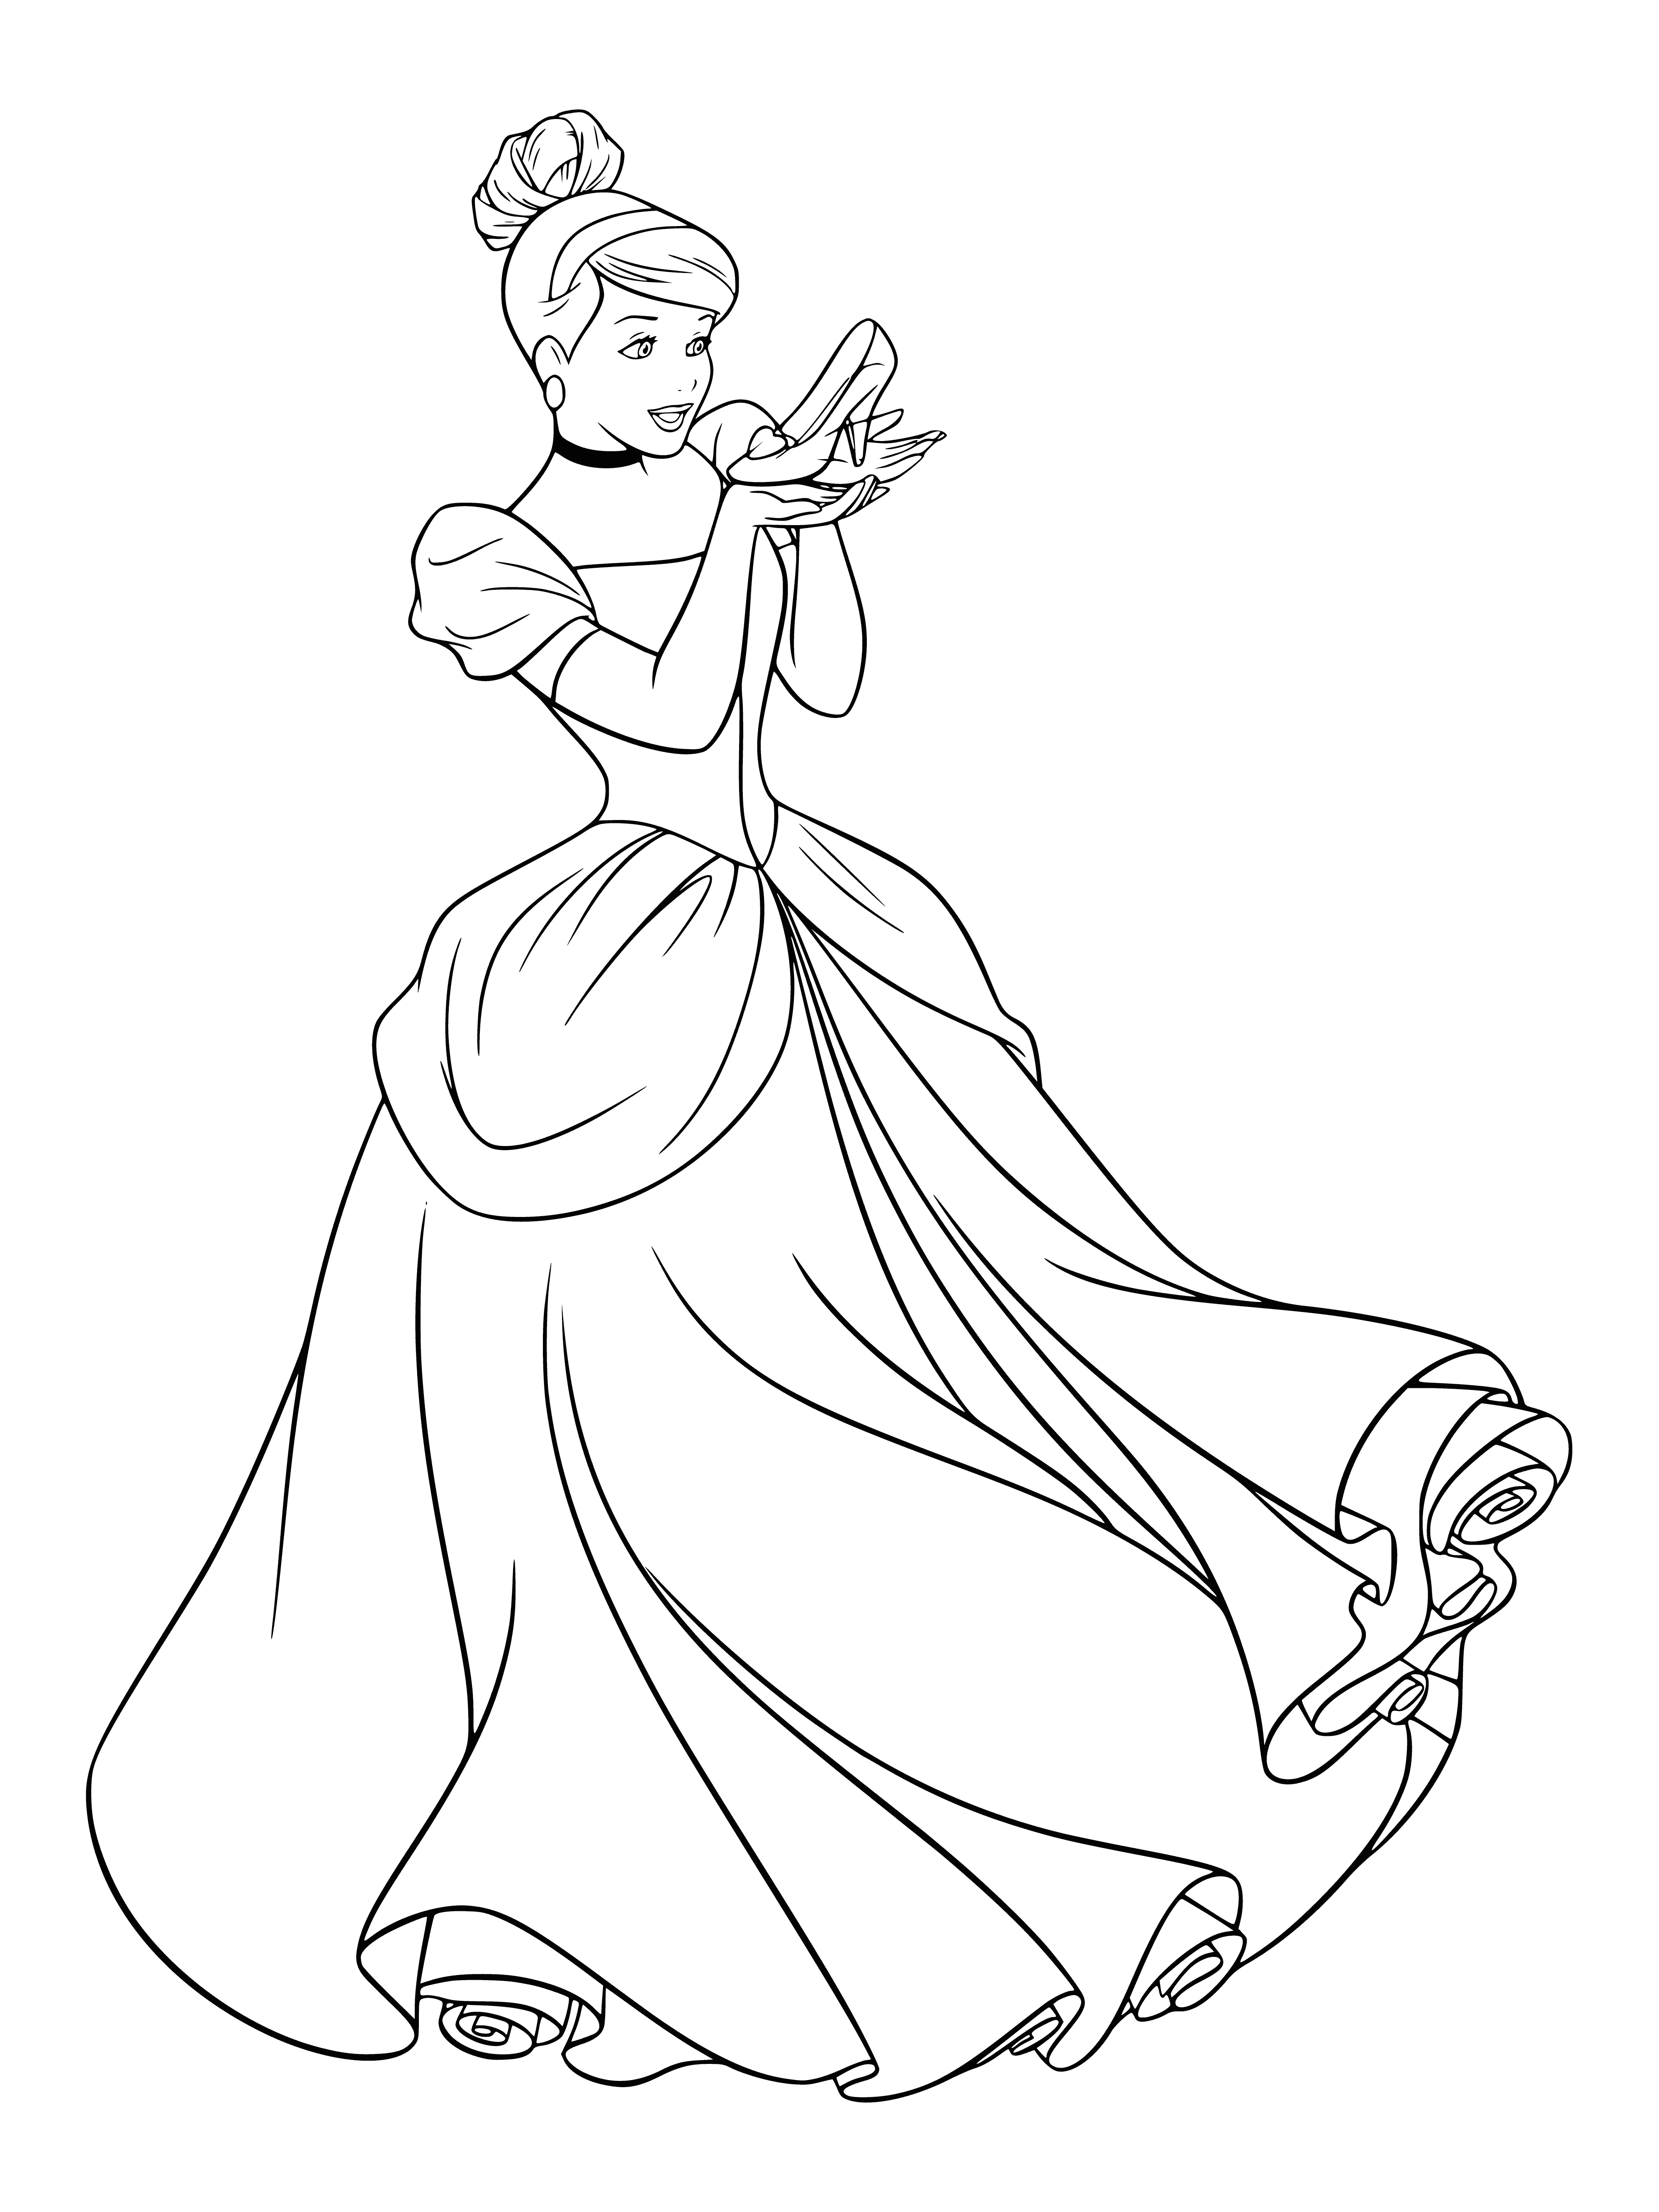 coloring page: Woman stands before castle in flowing dress, looking down at a glass slipper on her foot. #fairytale